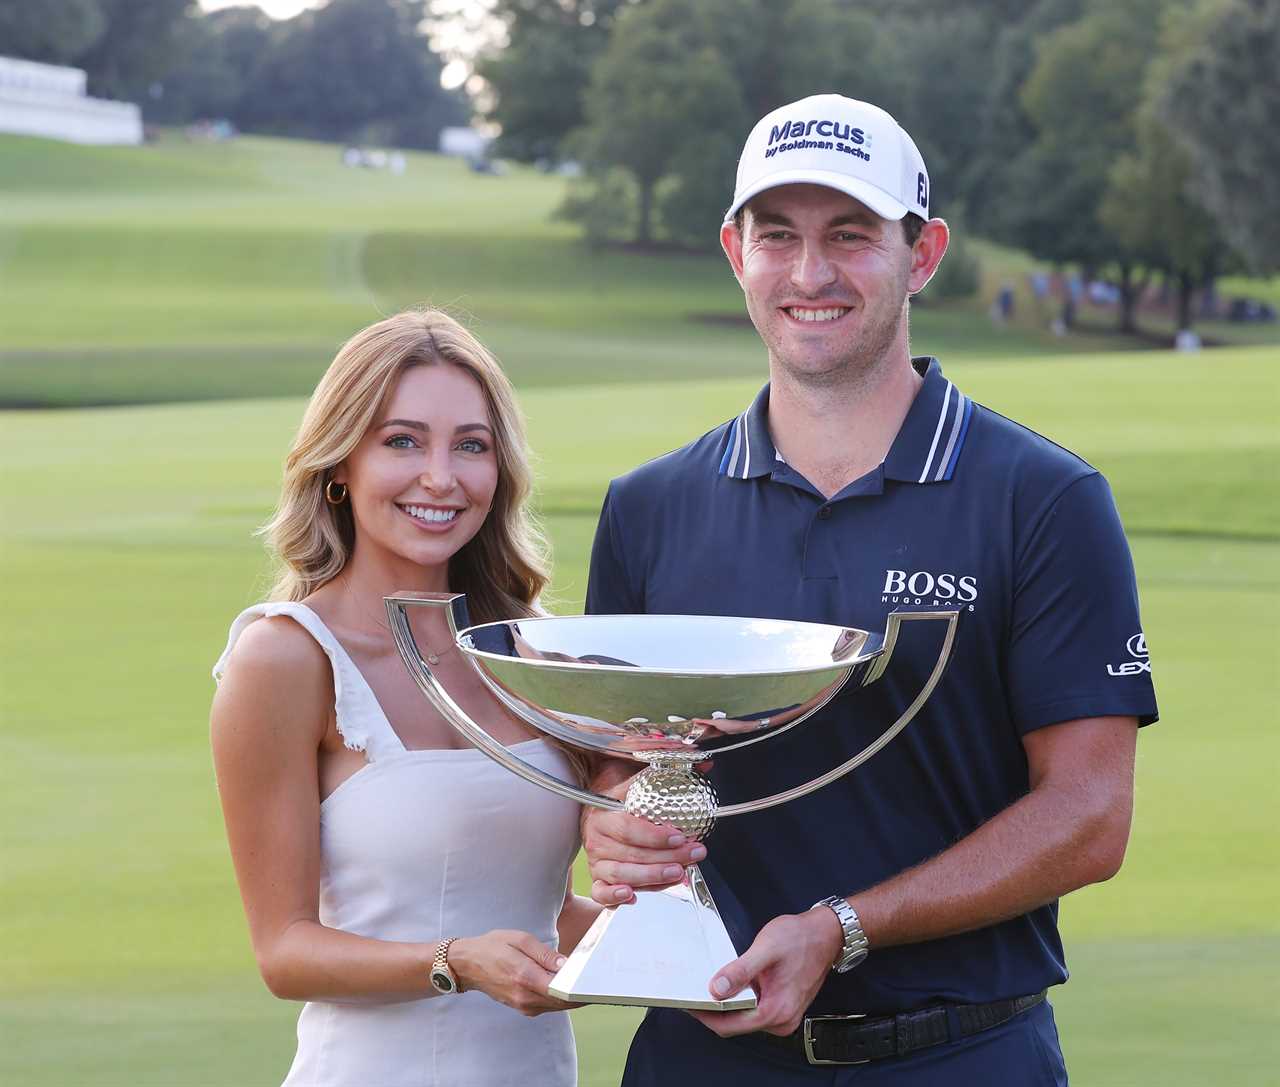 Meet Patrick Cantlay, Masters ace and his beautiful girlfriend Nikki